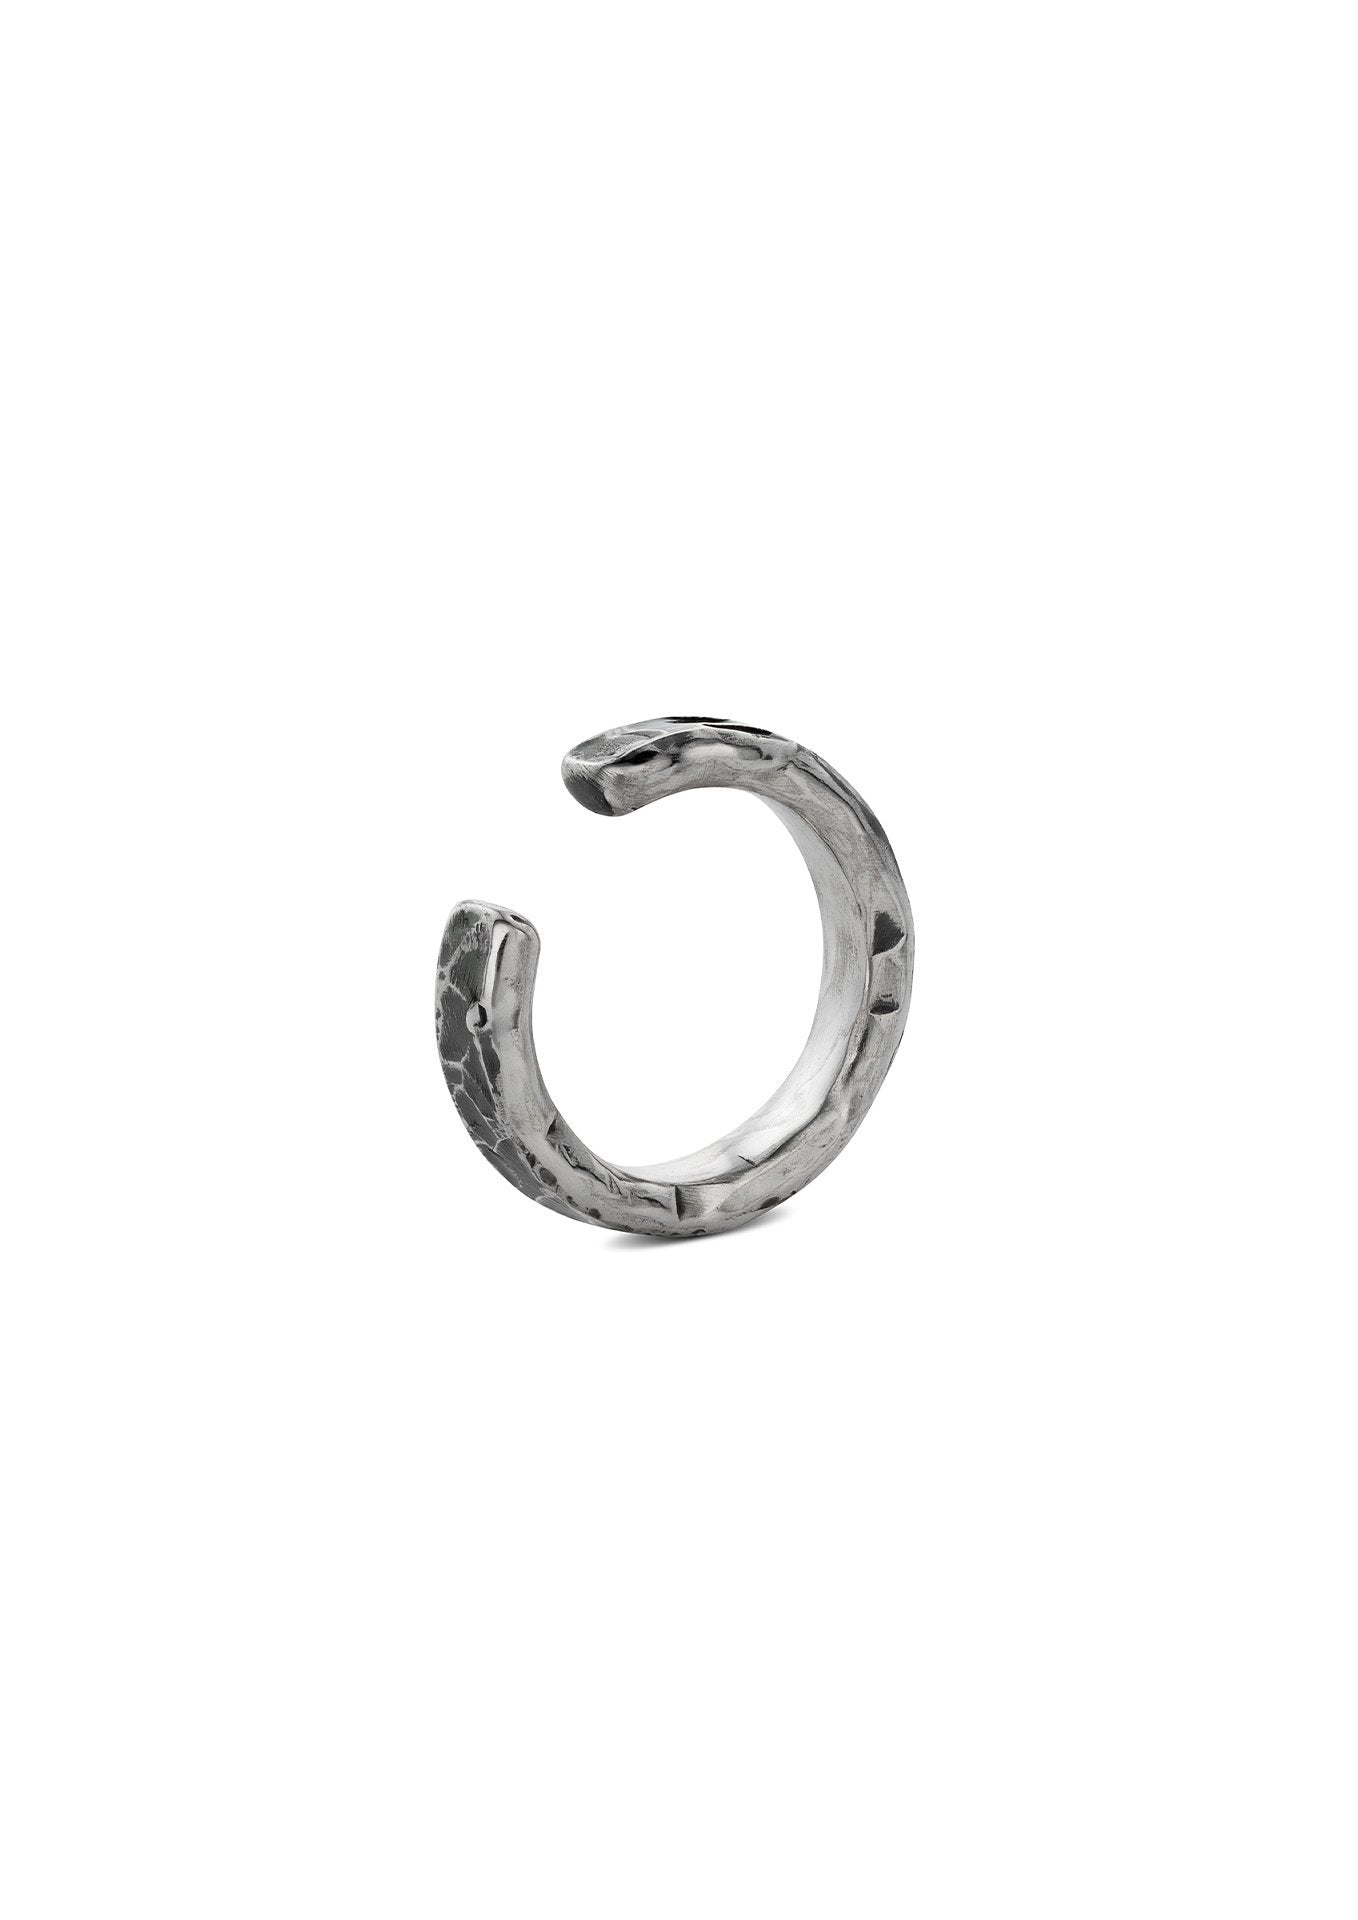 NO MORE accessories Rugged Line ear cuff in sterling silver